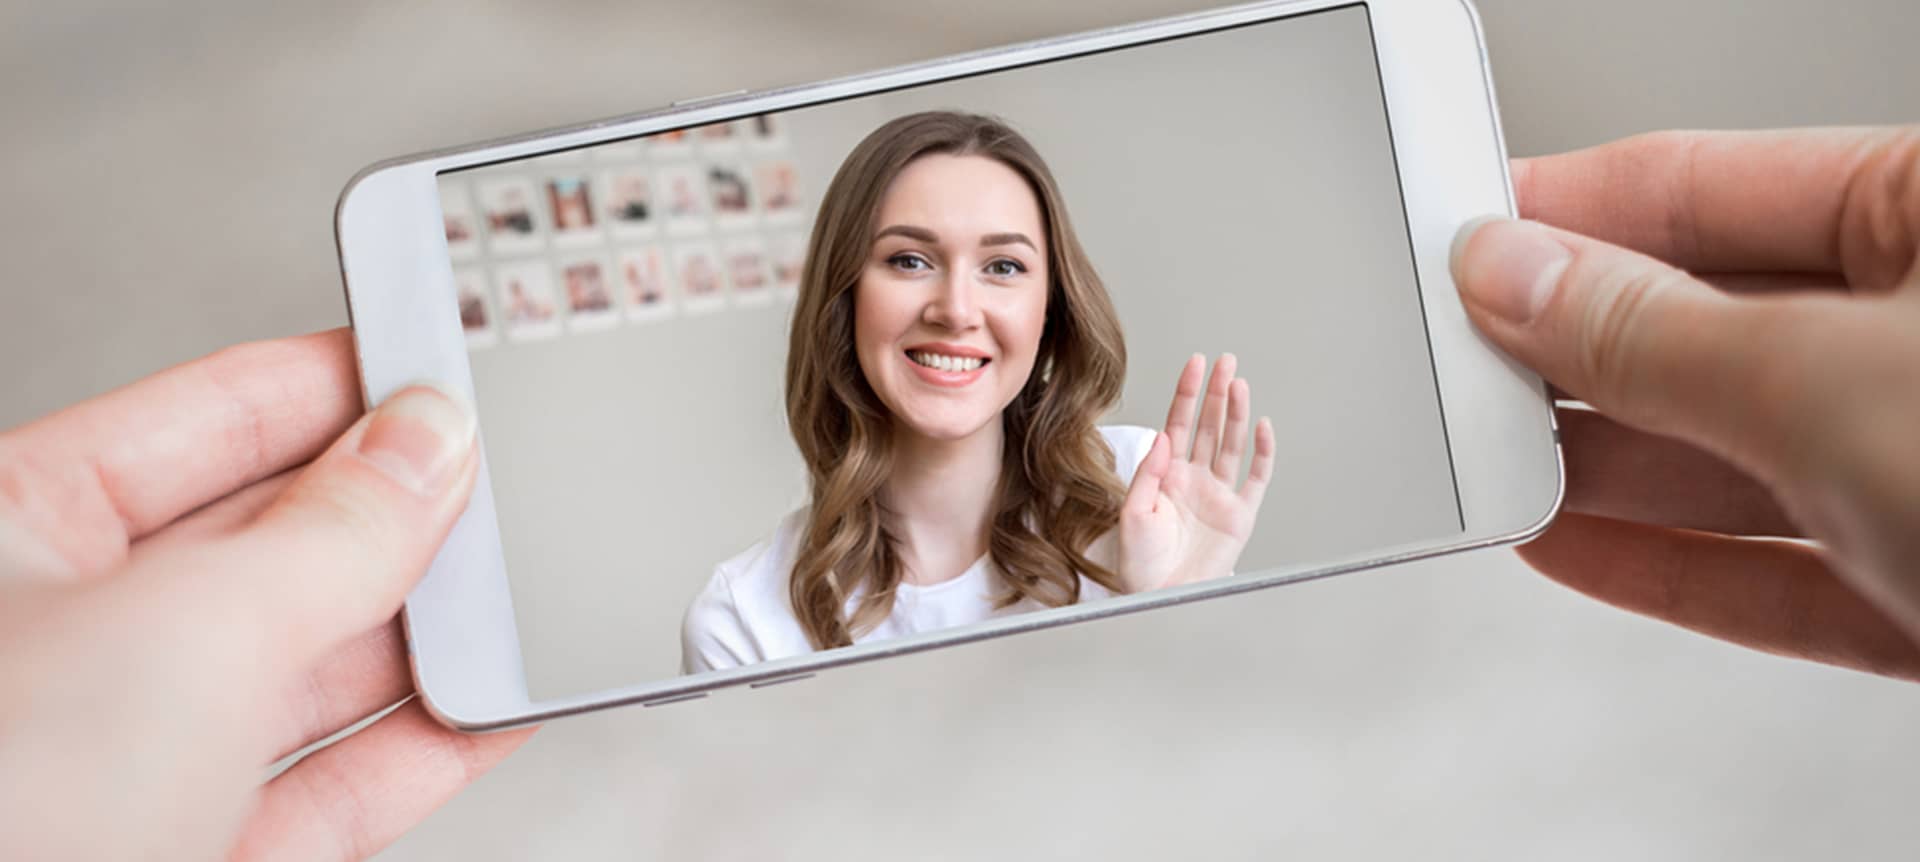 7 Important Reasons Why Video Assessment Interviews are the Future of Hiring